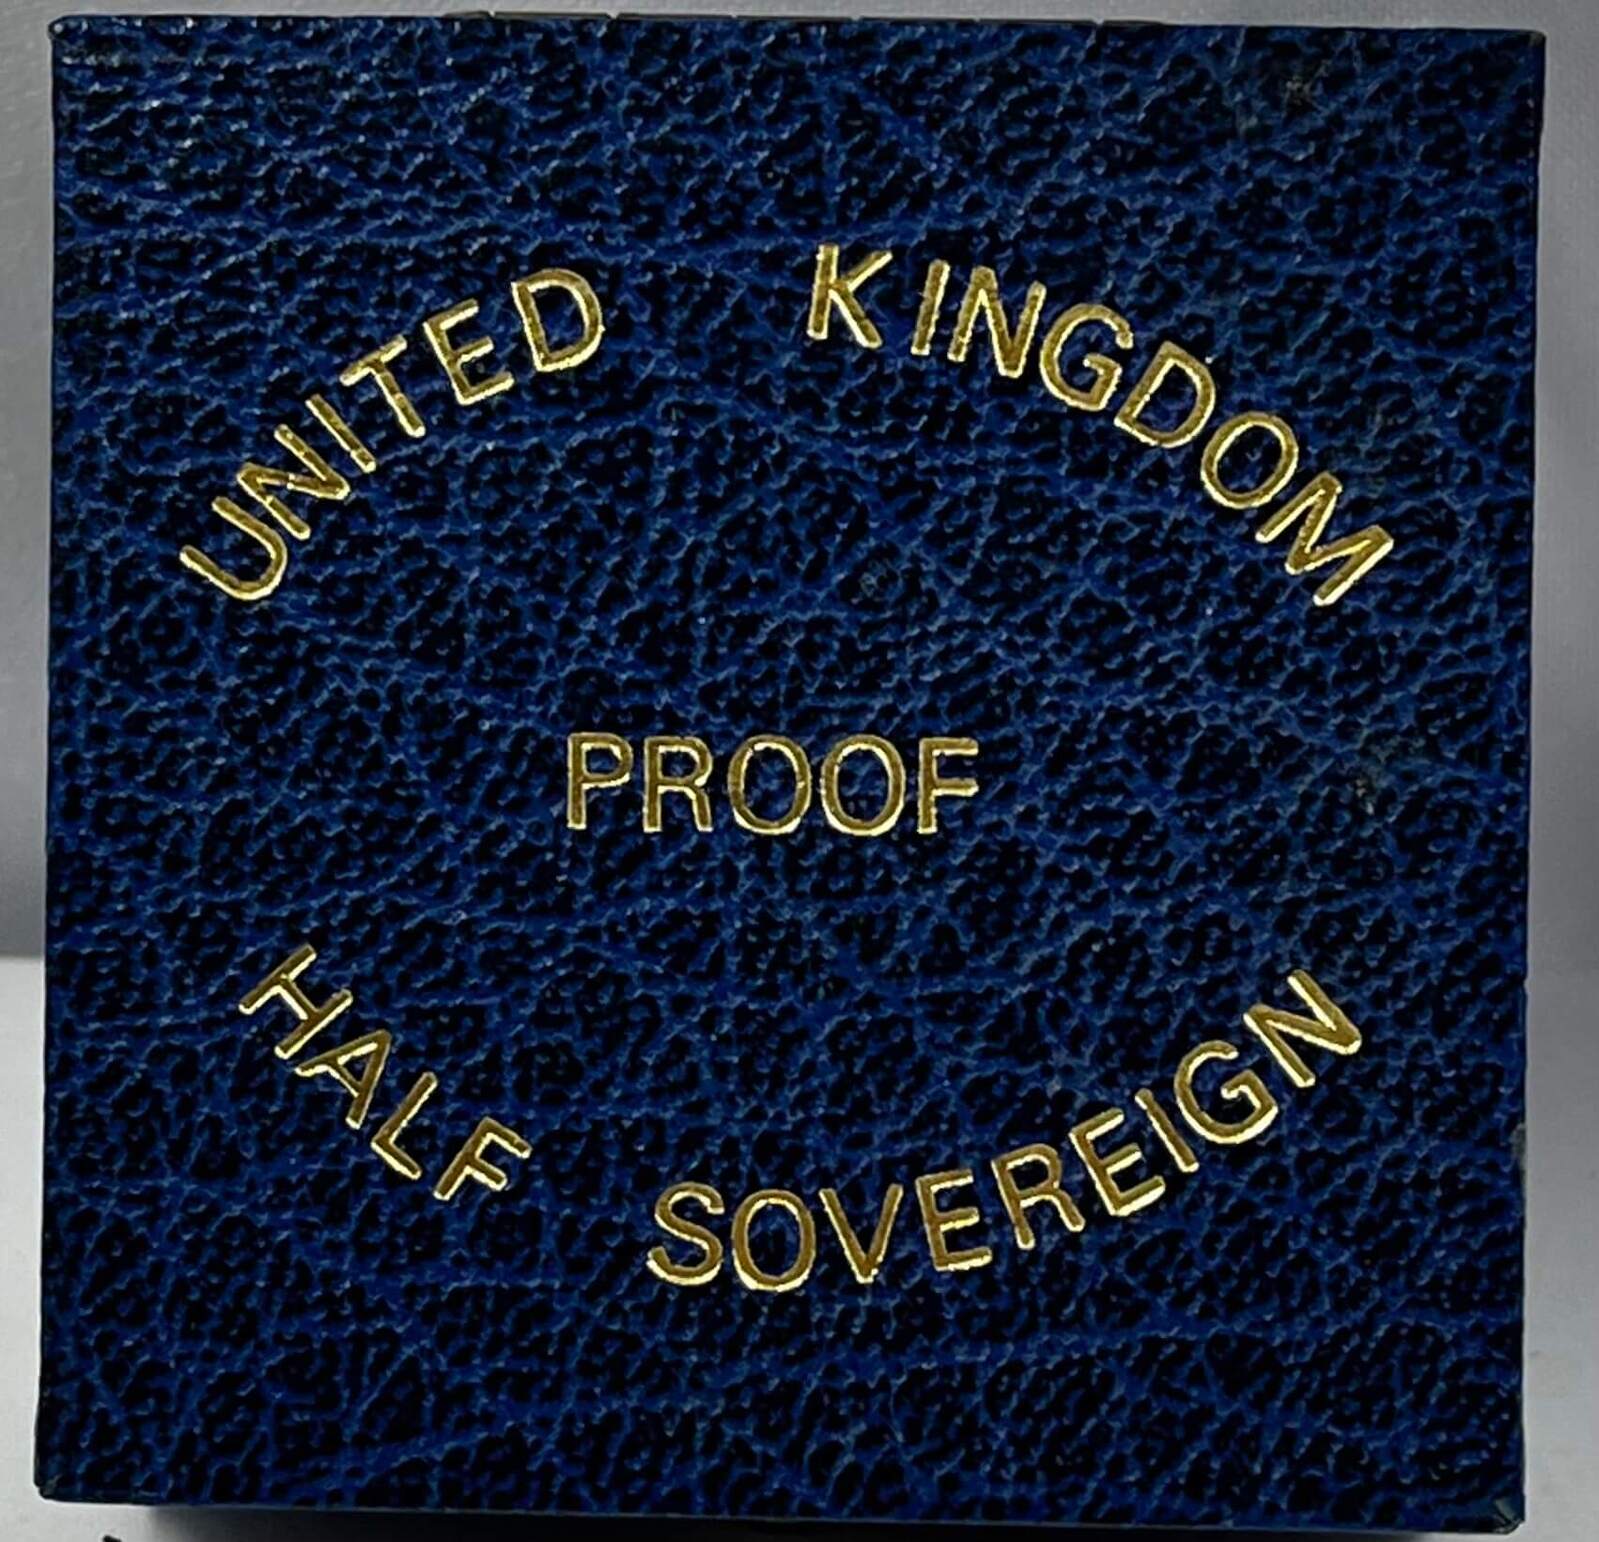 United Kingdom 1983 Half Sovereign Proof in Case product image